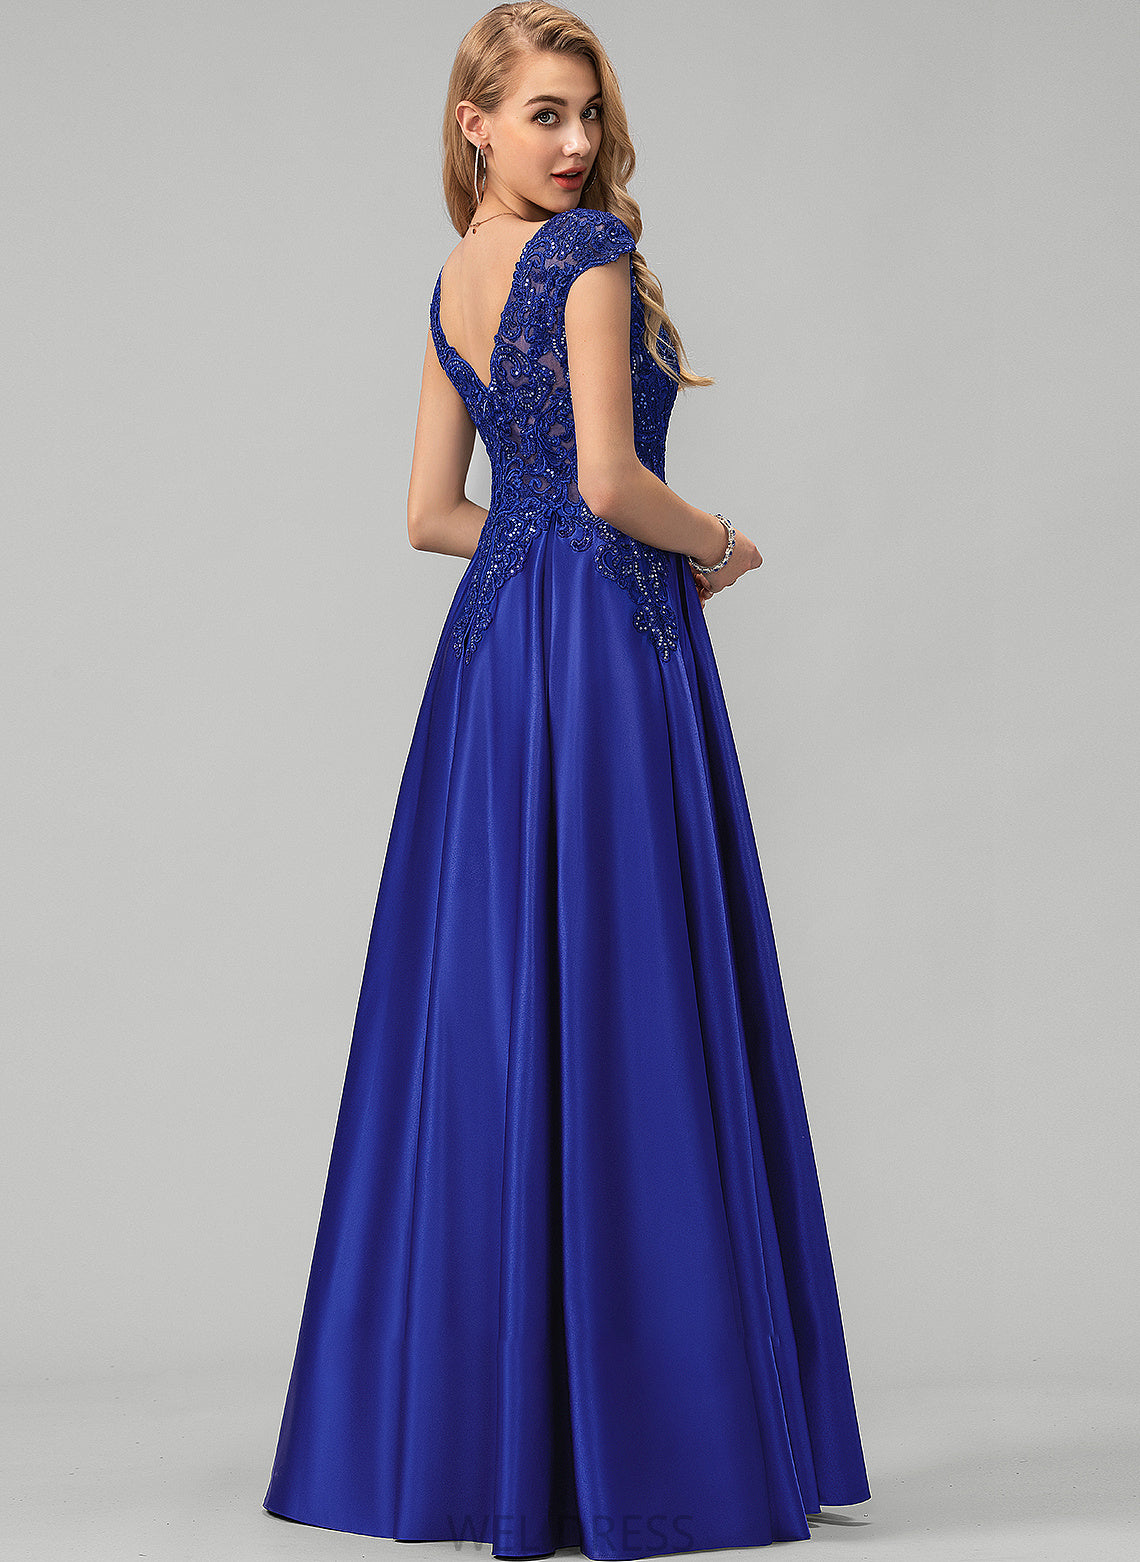 Satin Alula V-neck Ball-Gown/Princess Lace Prom Dresses Floor-Length With Sequins